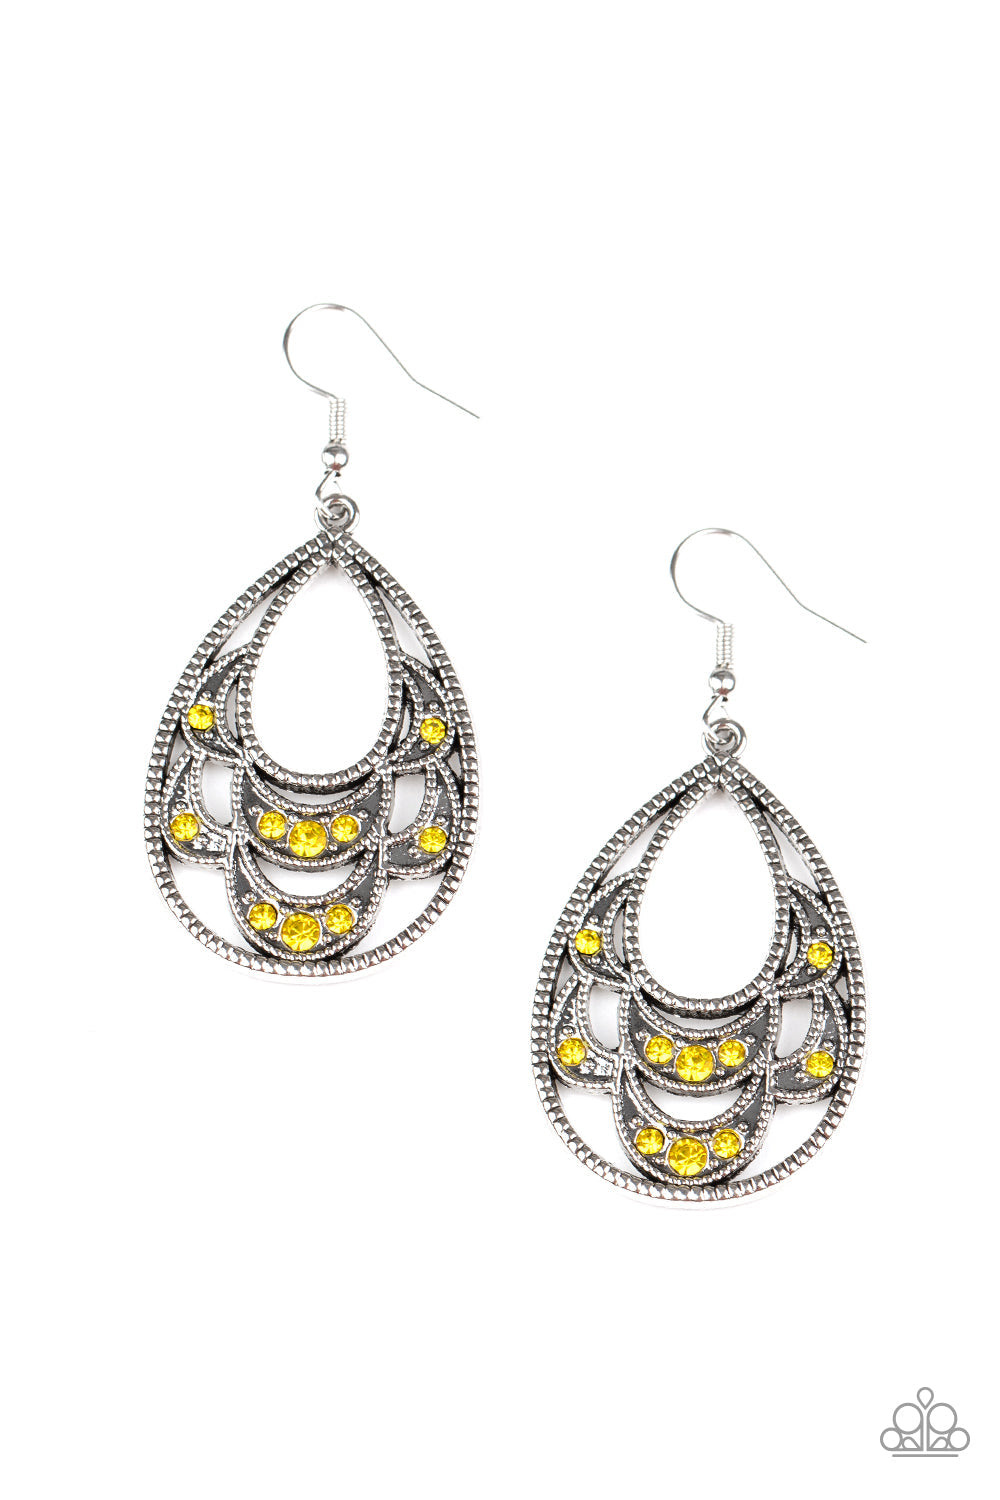 Malibu Macrame - Yellow and Silver Earrings - Paparazzi Accessories - Dotted in dainty yellow rhinestones, studded silver petals layer into an ornate silver teardrop for a whimsical look. Earring attaches to a standard fishhook fitting fashion earrings.